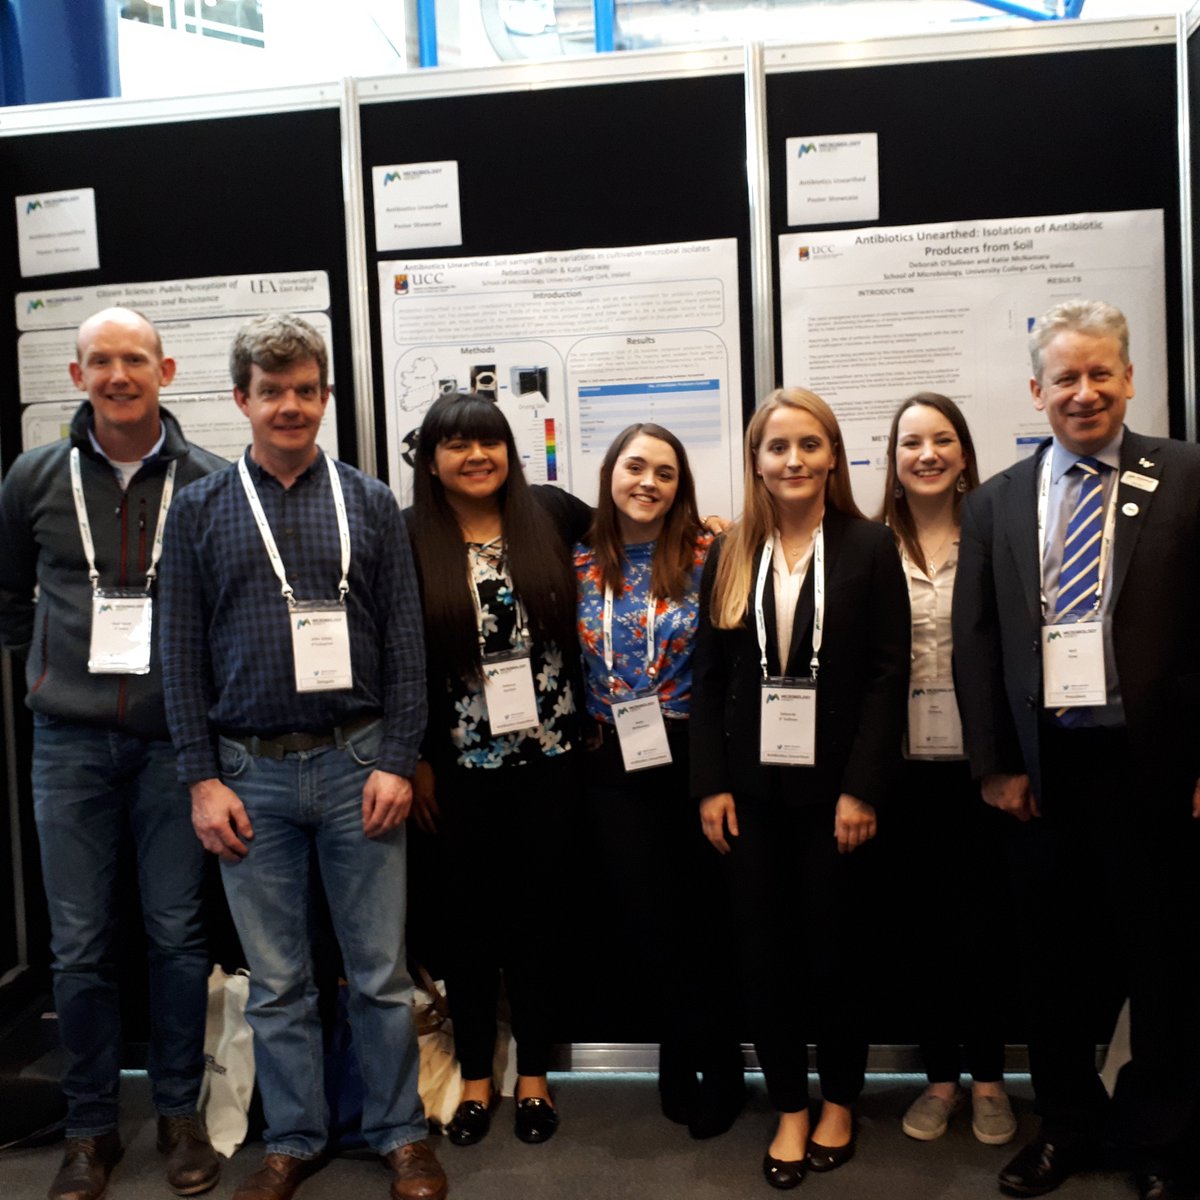 3rd year undergrads presenting research from antibiotics  unearthed project at micro soc conference in Birmingham last week.  Pictured with Prof Neil Gow, president of the Society.  Students left to right are Rebecca Quinlan, Katie McNamara, Deborah O'Sullivan and Kate Conway.